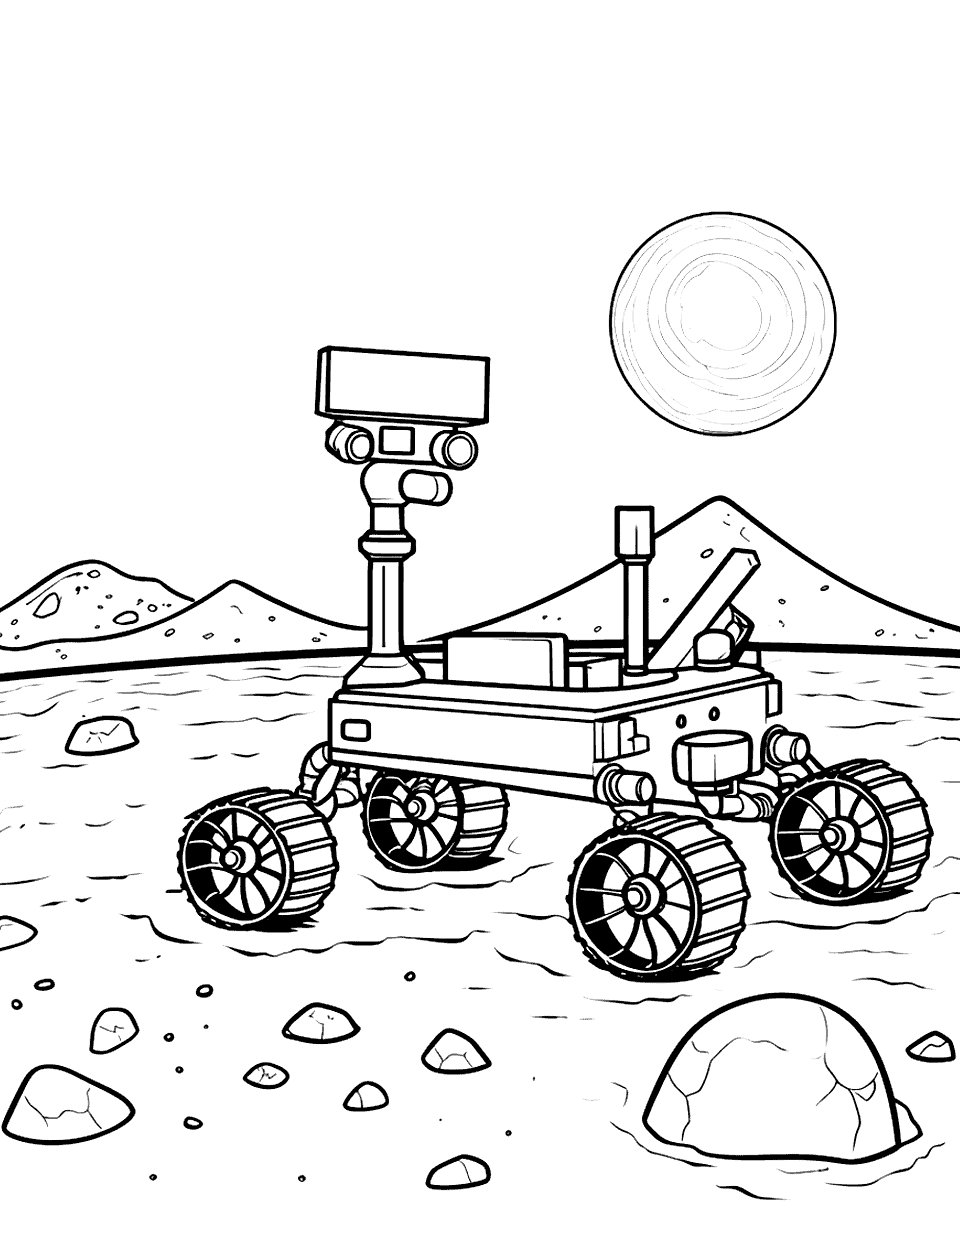 Mars Rover Exploration Solar System Coloring Page - A Mars rover exploring the surface, with hills in the background.